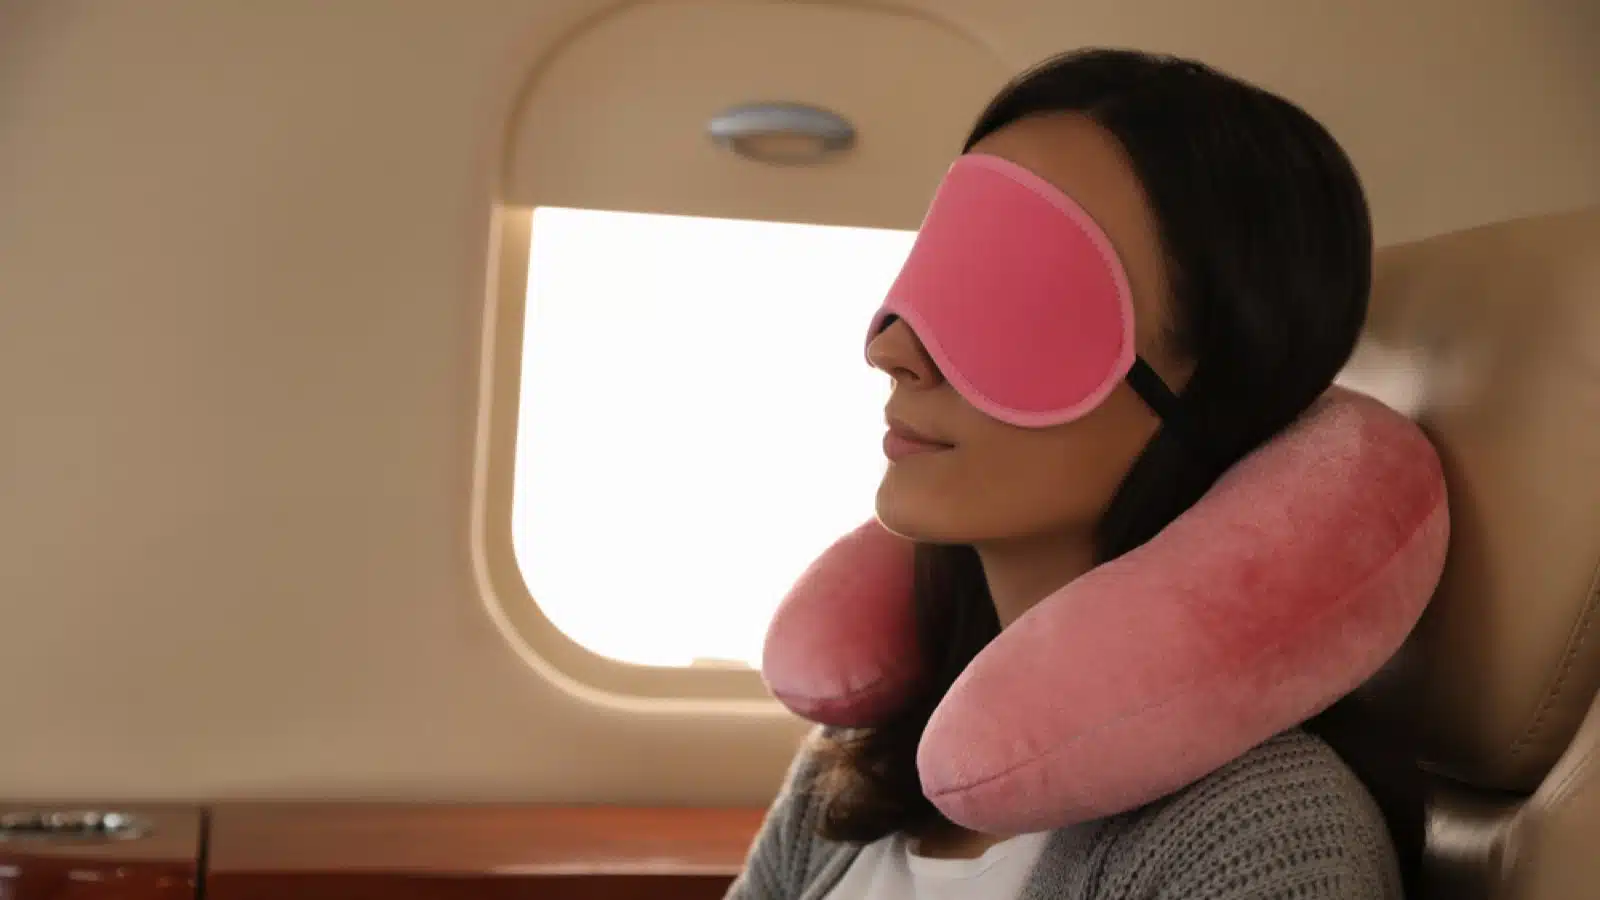 Sleeping with pillow and sleep mask in flight